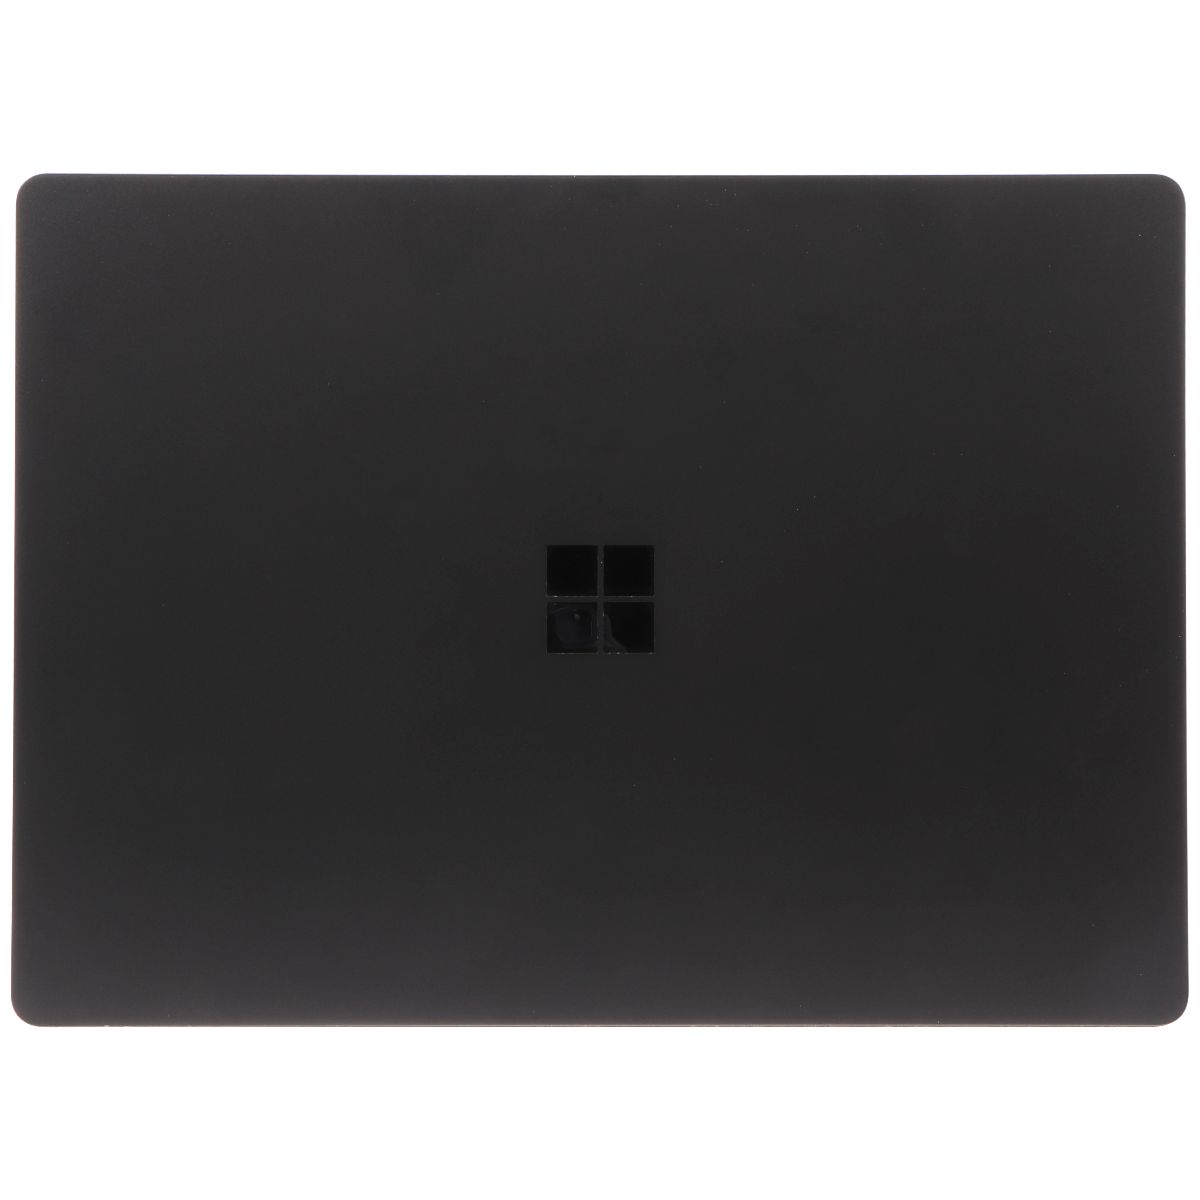 Microsoft Surface Laptop 4 (13.5-in) 1951 (i7-1185G7/32GB RAM/1 TB SSD) - Black Laptops - PC Laptops & Netbooks Microsoft    - Simple Cell Bulk Wholesale Pricing - USA Seller